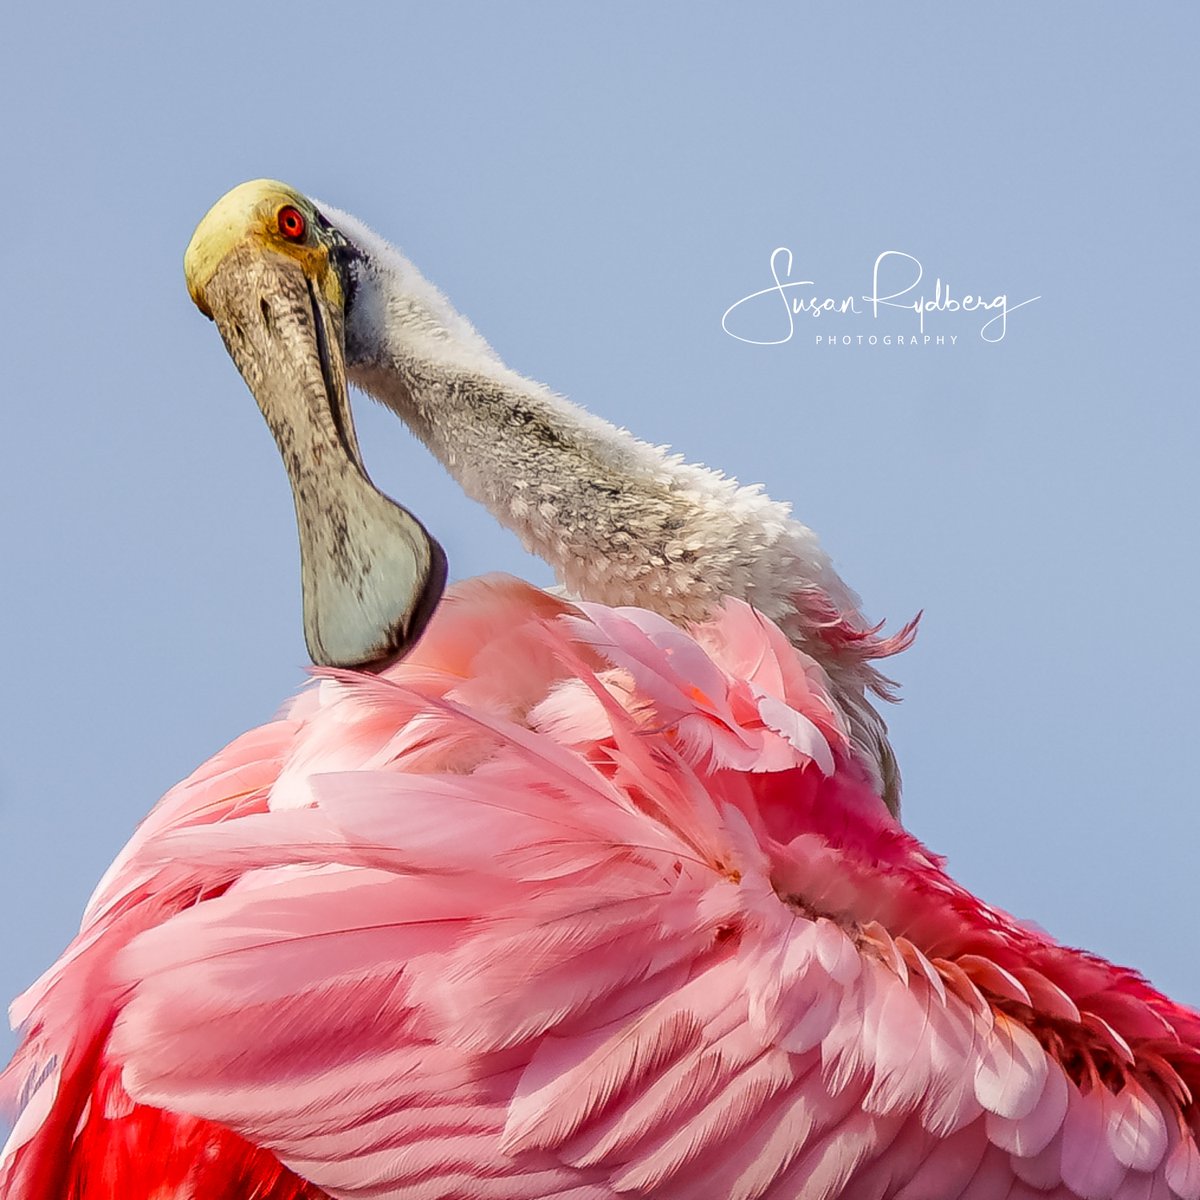 Roseate Spoonbill preening its pink feathers. Like the flamingo, the roseate spoonbill's pink color comes from the food it eats. The roseate spoonbill can be found on the coasts of Texas, Louisiana and southern Florida. #bird #Birdland #BirdsSeenIn2024 #photo #photography…